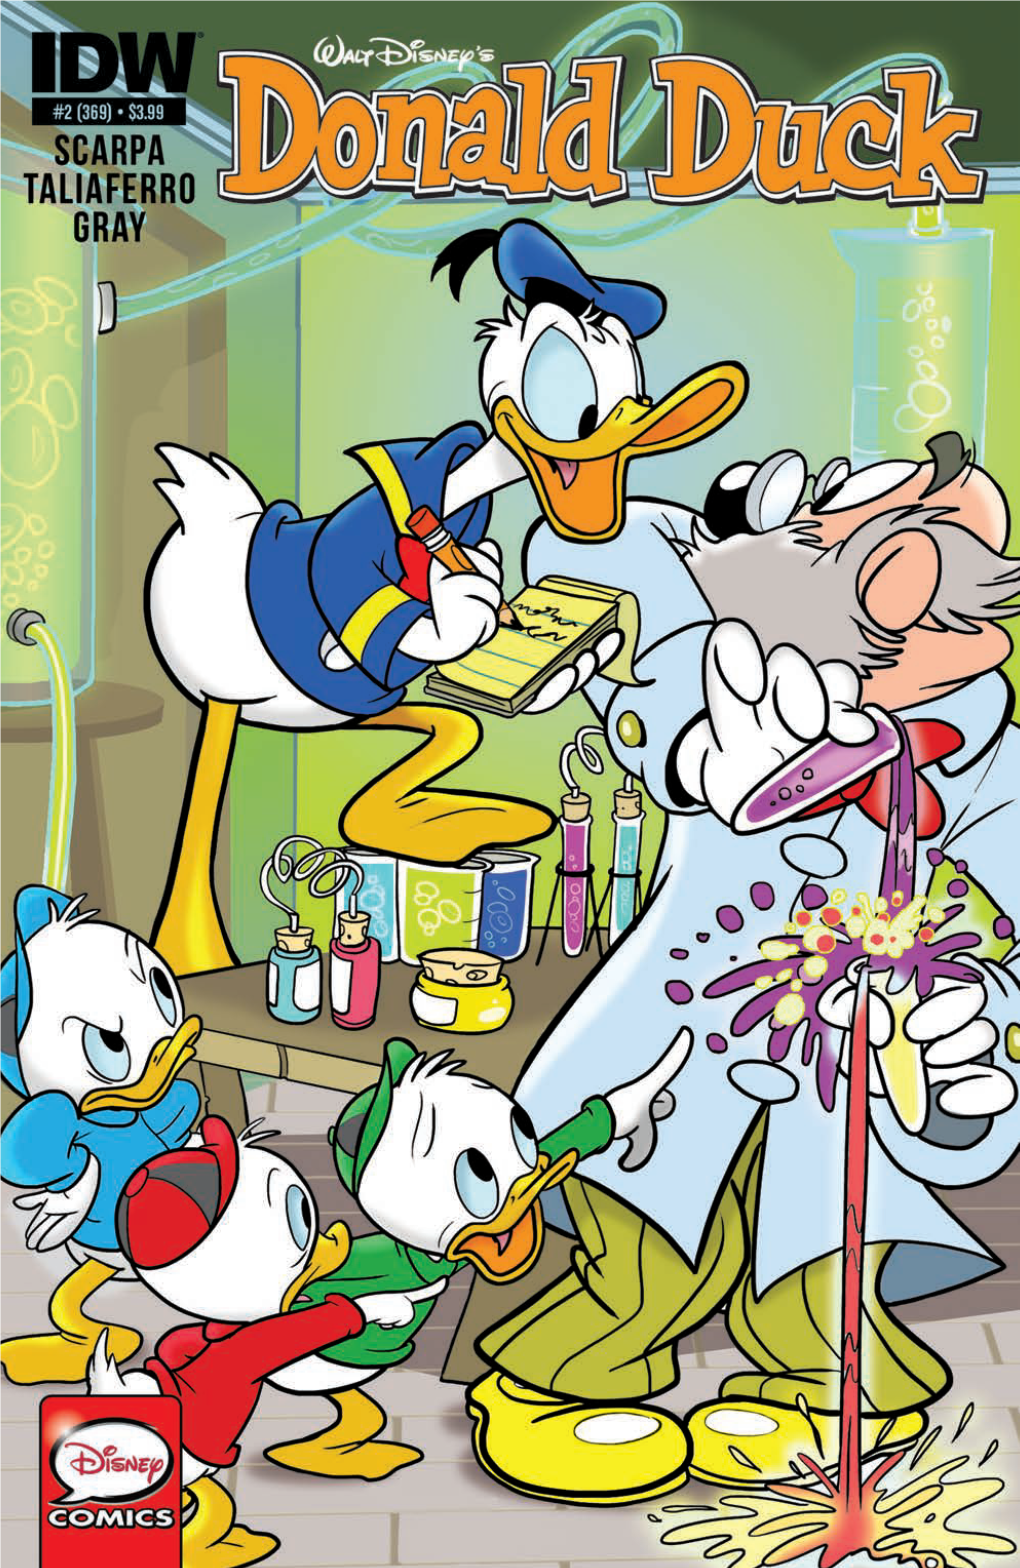 Donald Duck #2 Preview